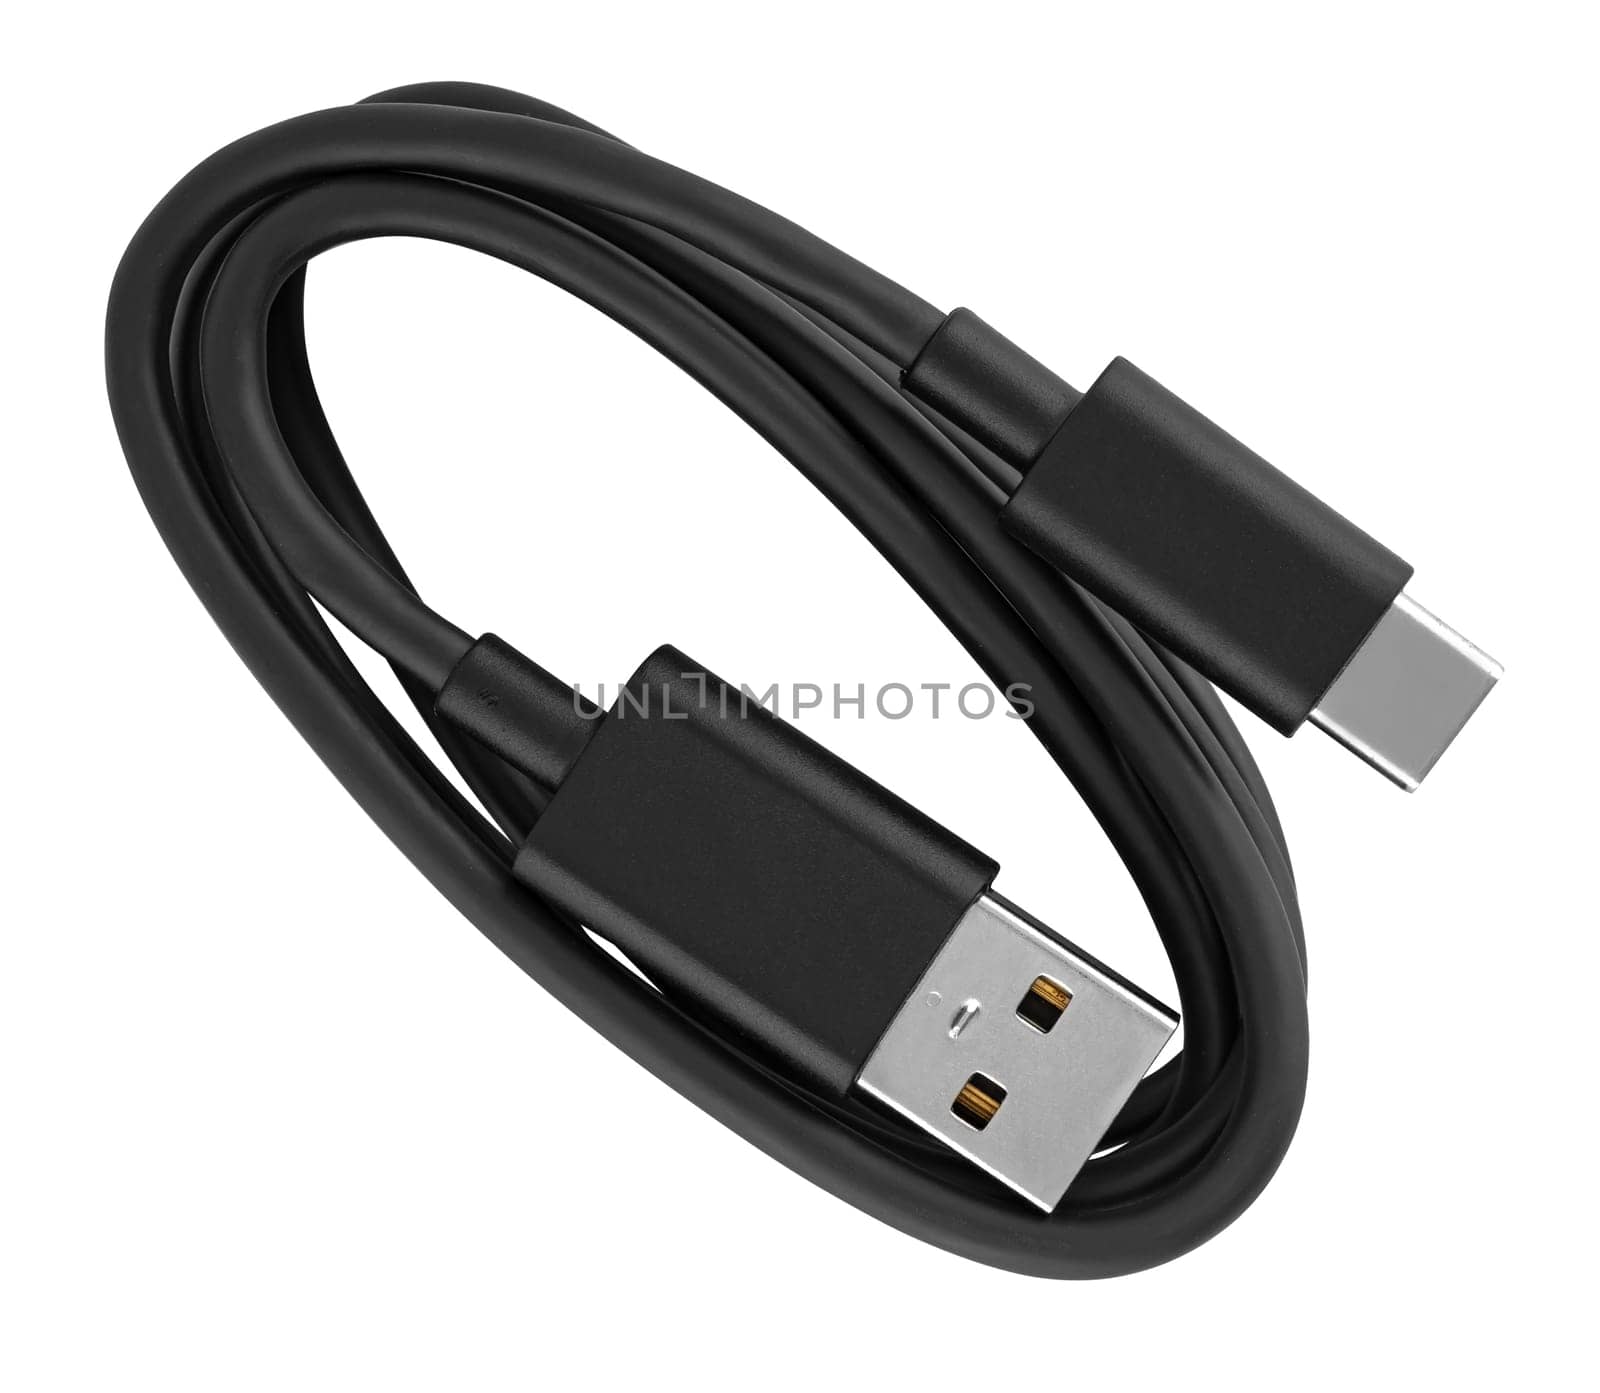 Cable and Type-C and USB connector, on white background by A_A